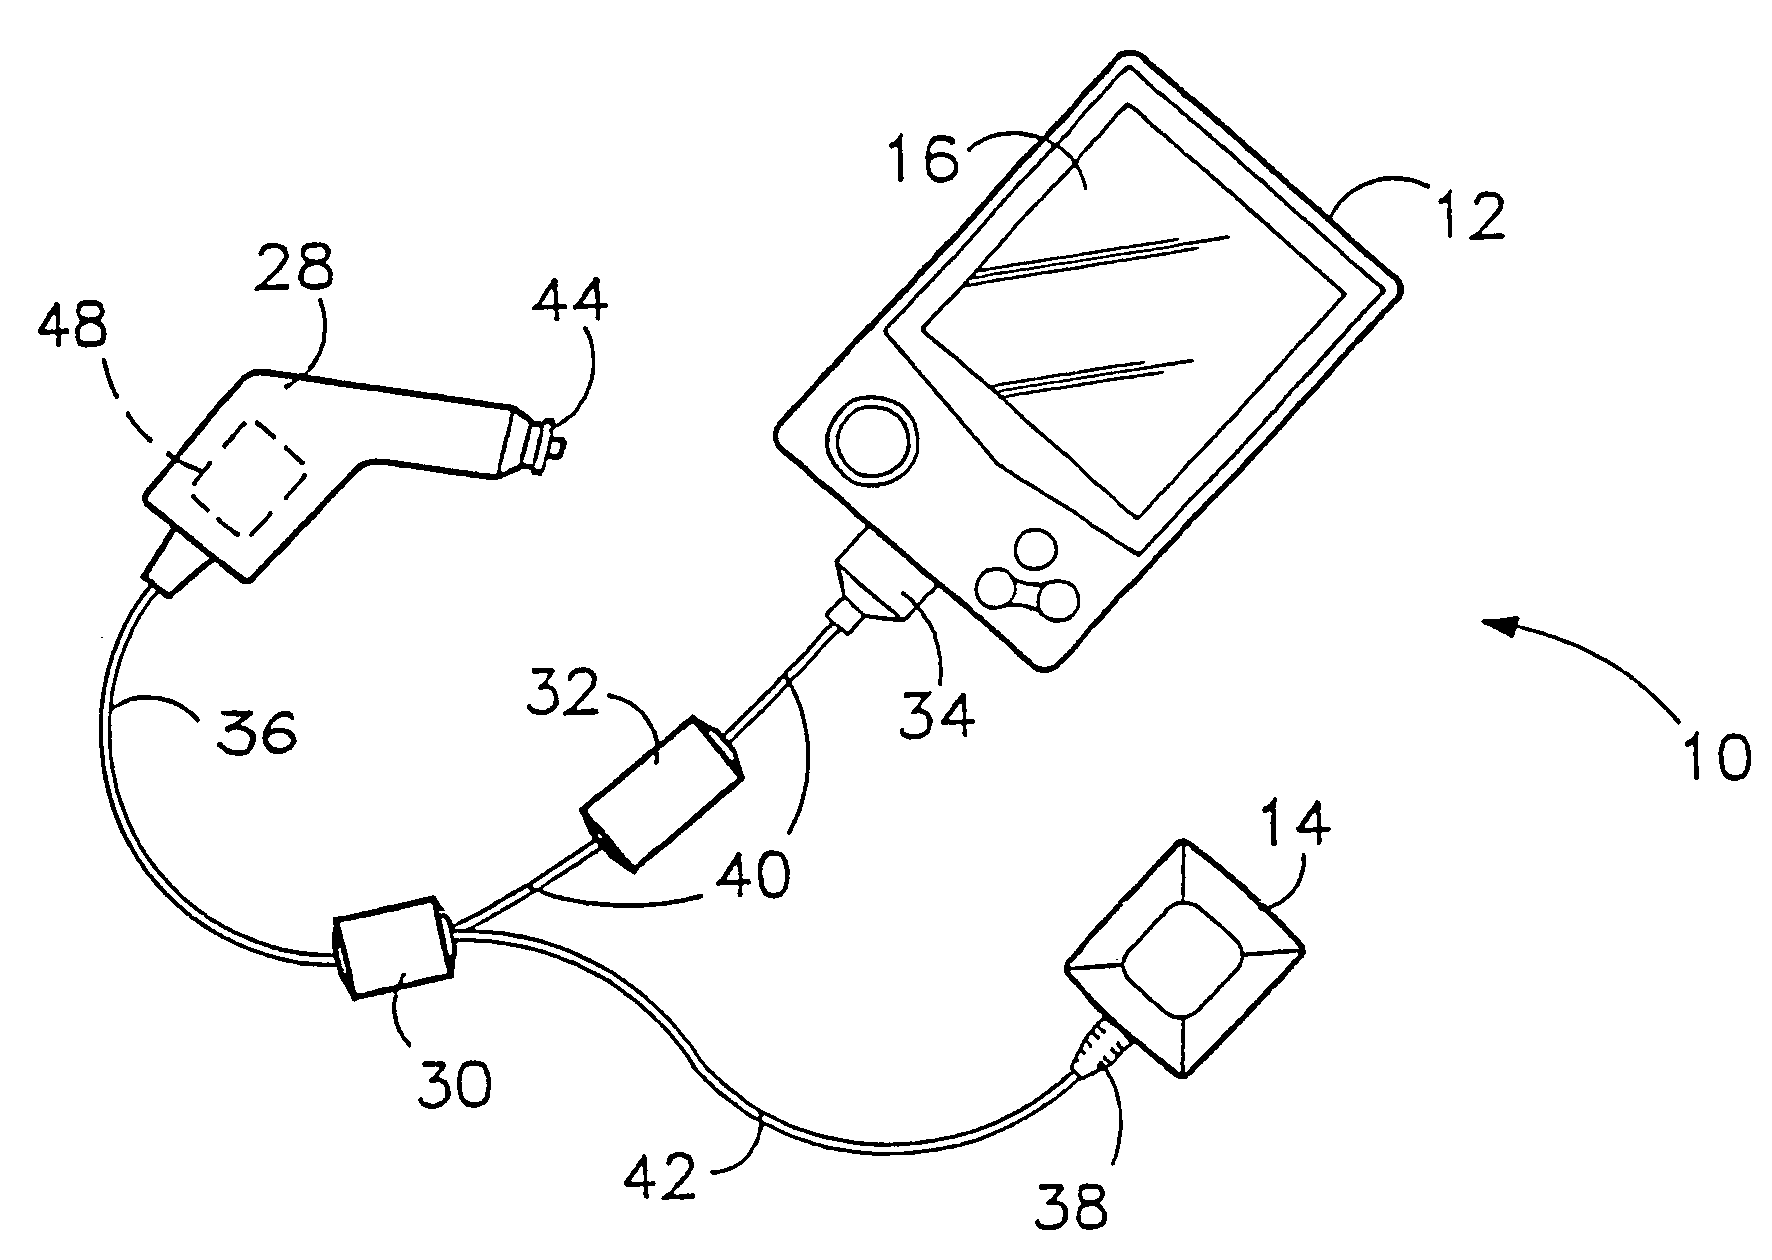 Integrated connection assembly for global positioning system (GPS) receiver and personal digital assistance (PDA) device and cellular phone